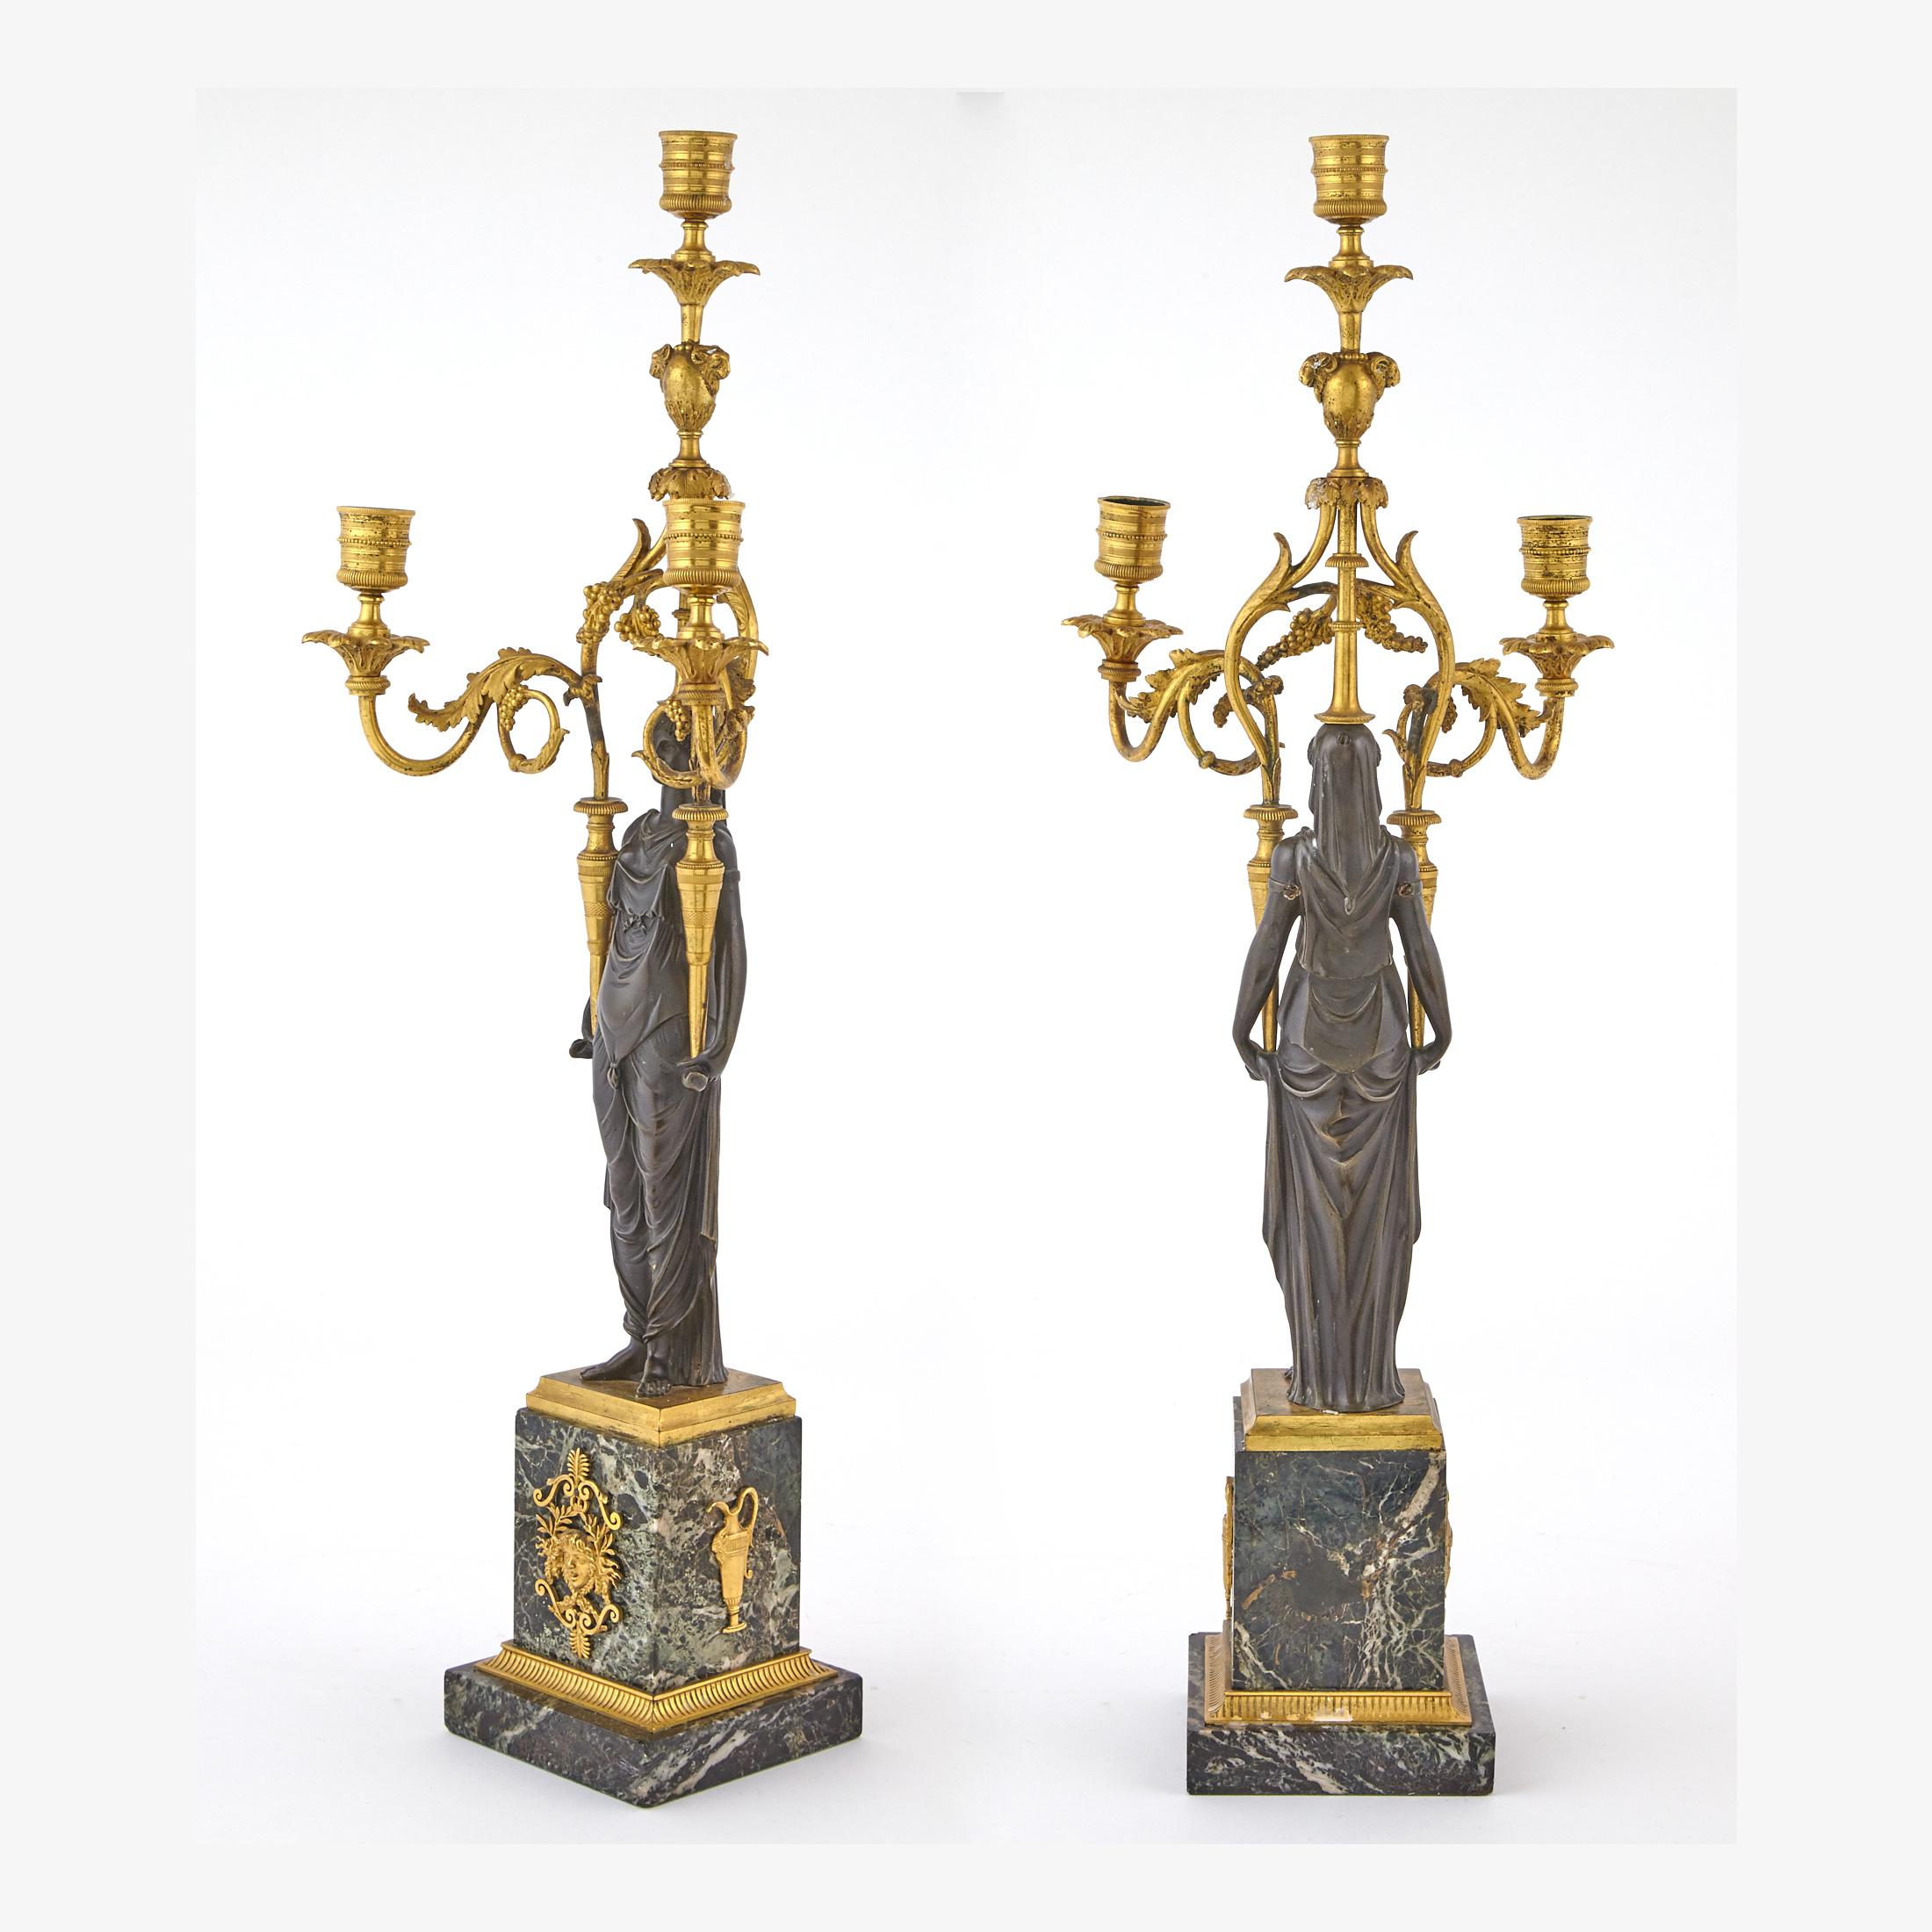 A neoclassical-form woman holding two candle arms with leaves and grapes surmounted on a rectangular base.

Date: 19th century
Origin: French
Dimension: 24 1/2 in. x 9 in.